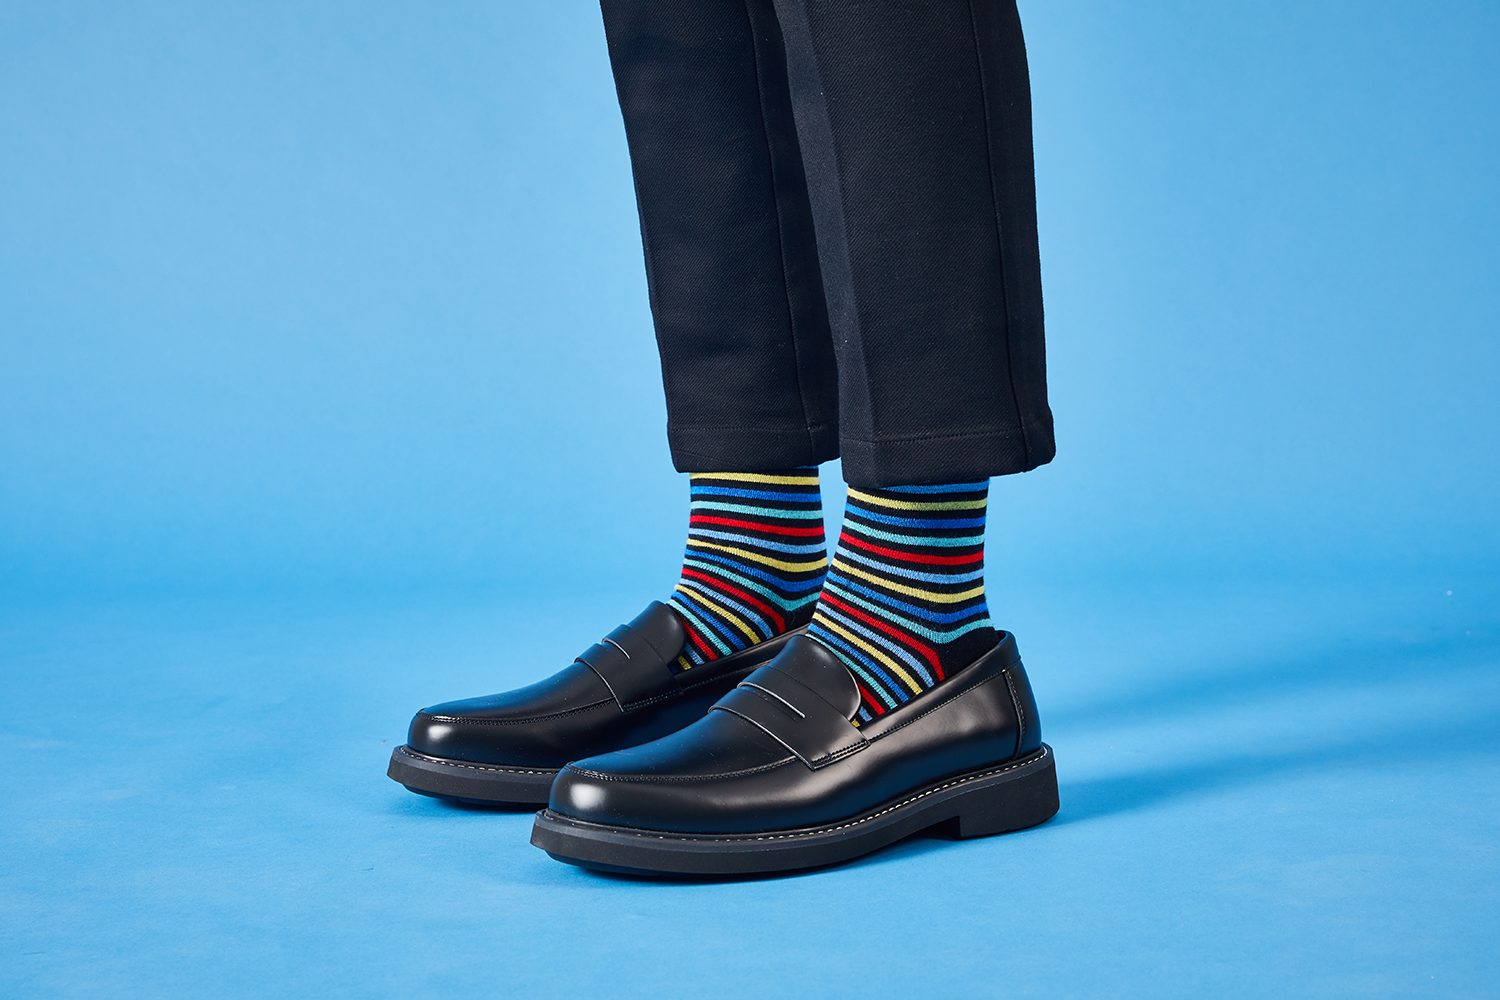 person wearing striped socks and black shoes